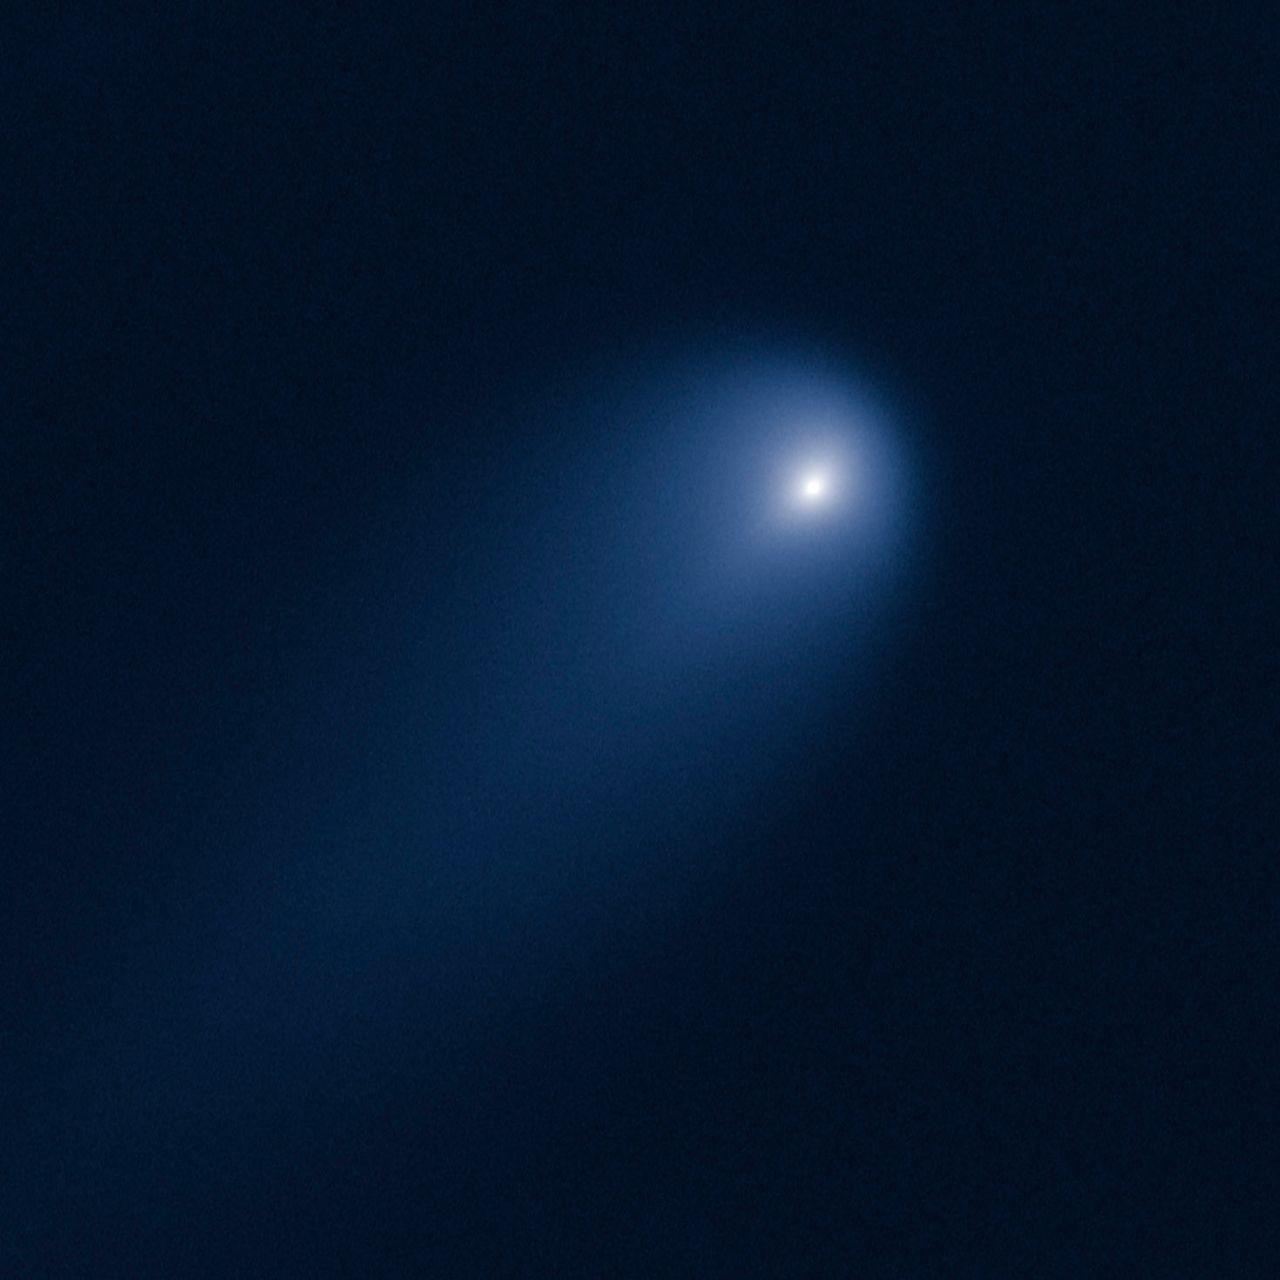 The Hubble Space Telescope took this picture of Comet ISON on April 10, when the comet was slightly closer than Jupiter's orbit, or about 386 million miles from the sun.